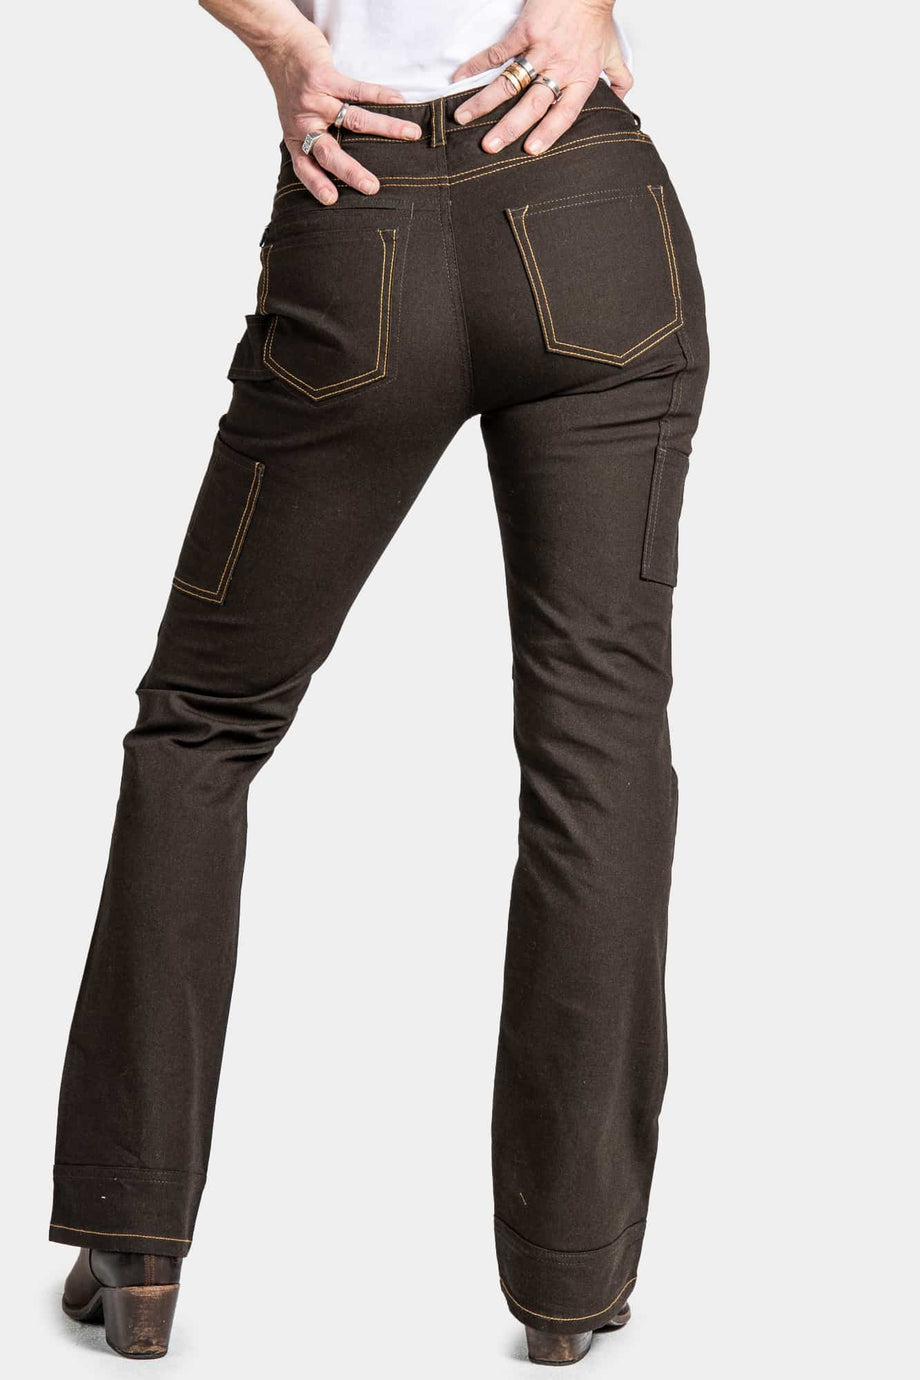 Fab Find: Boot Cut Pants with Wide Waistband - YLF